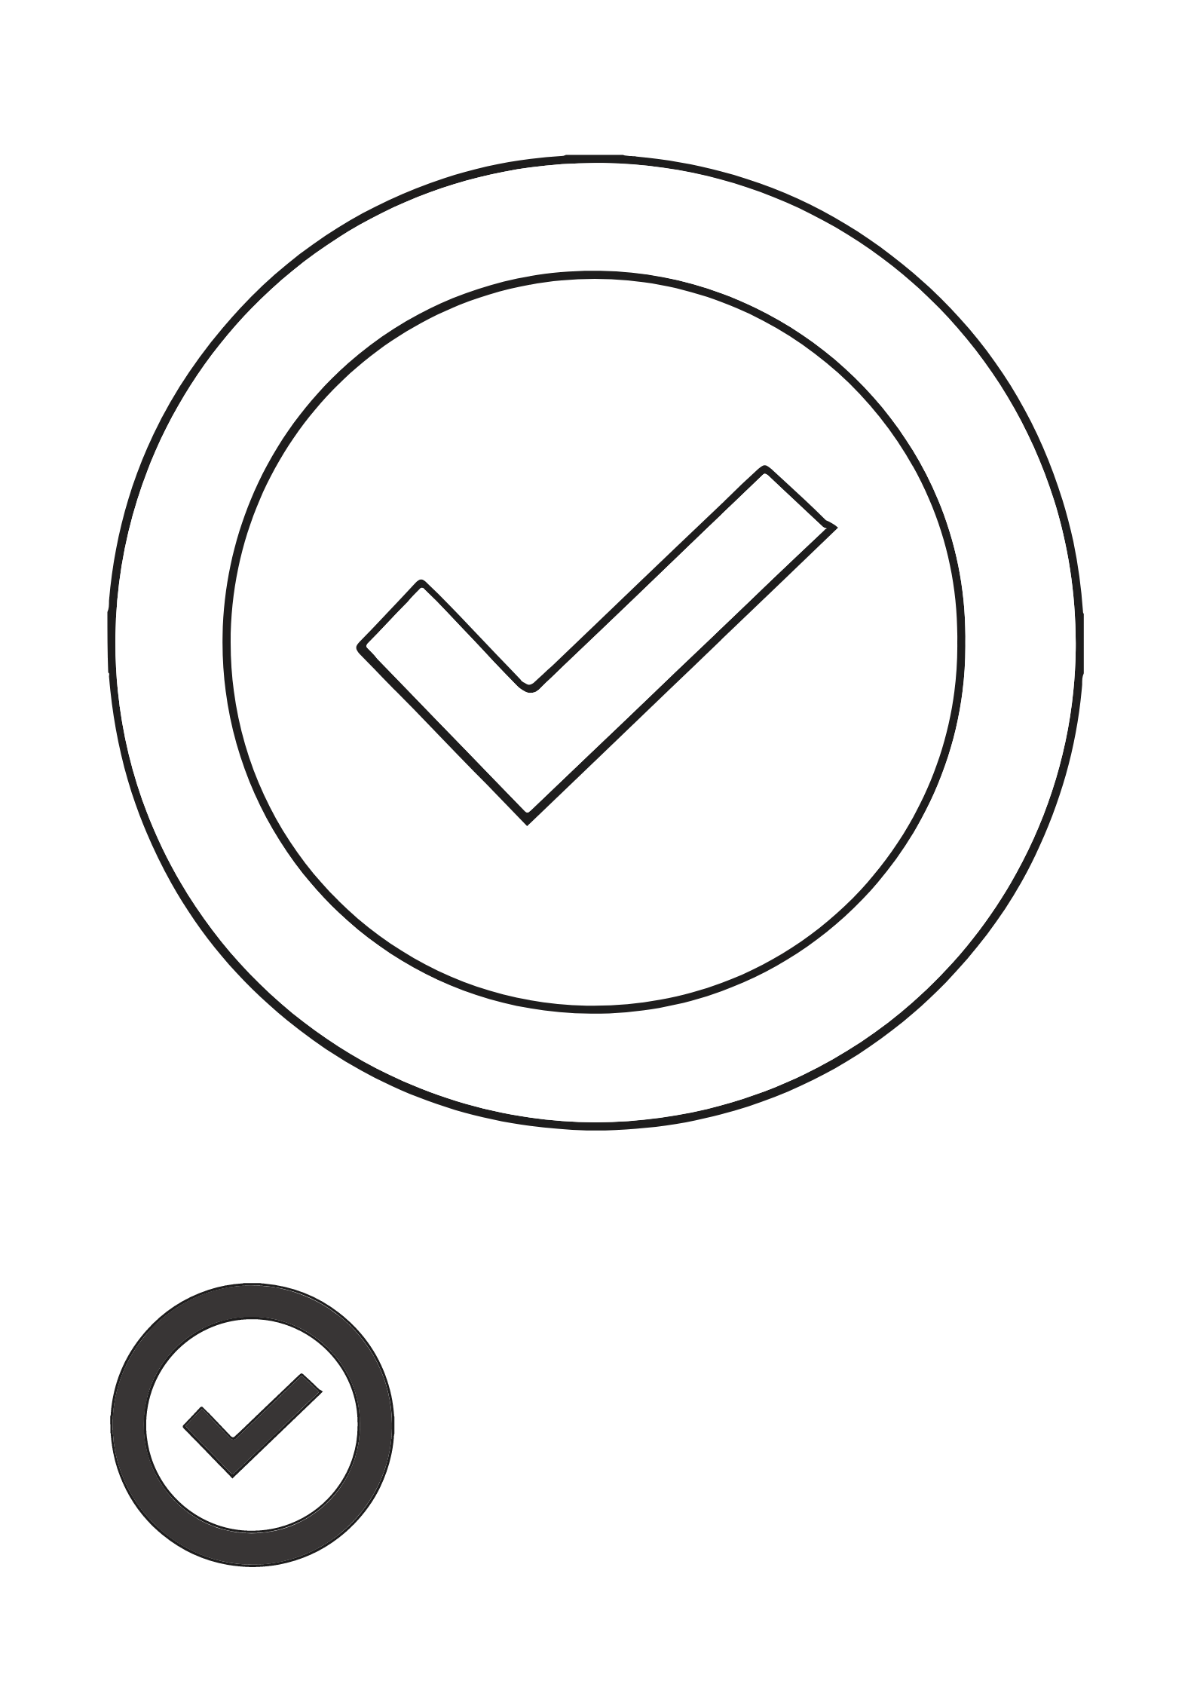 Black Check/Tick Mark Coloring Page Template